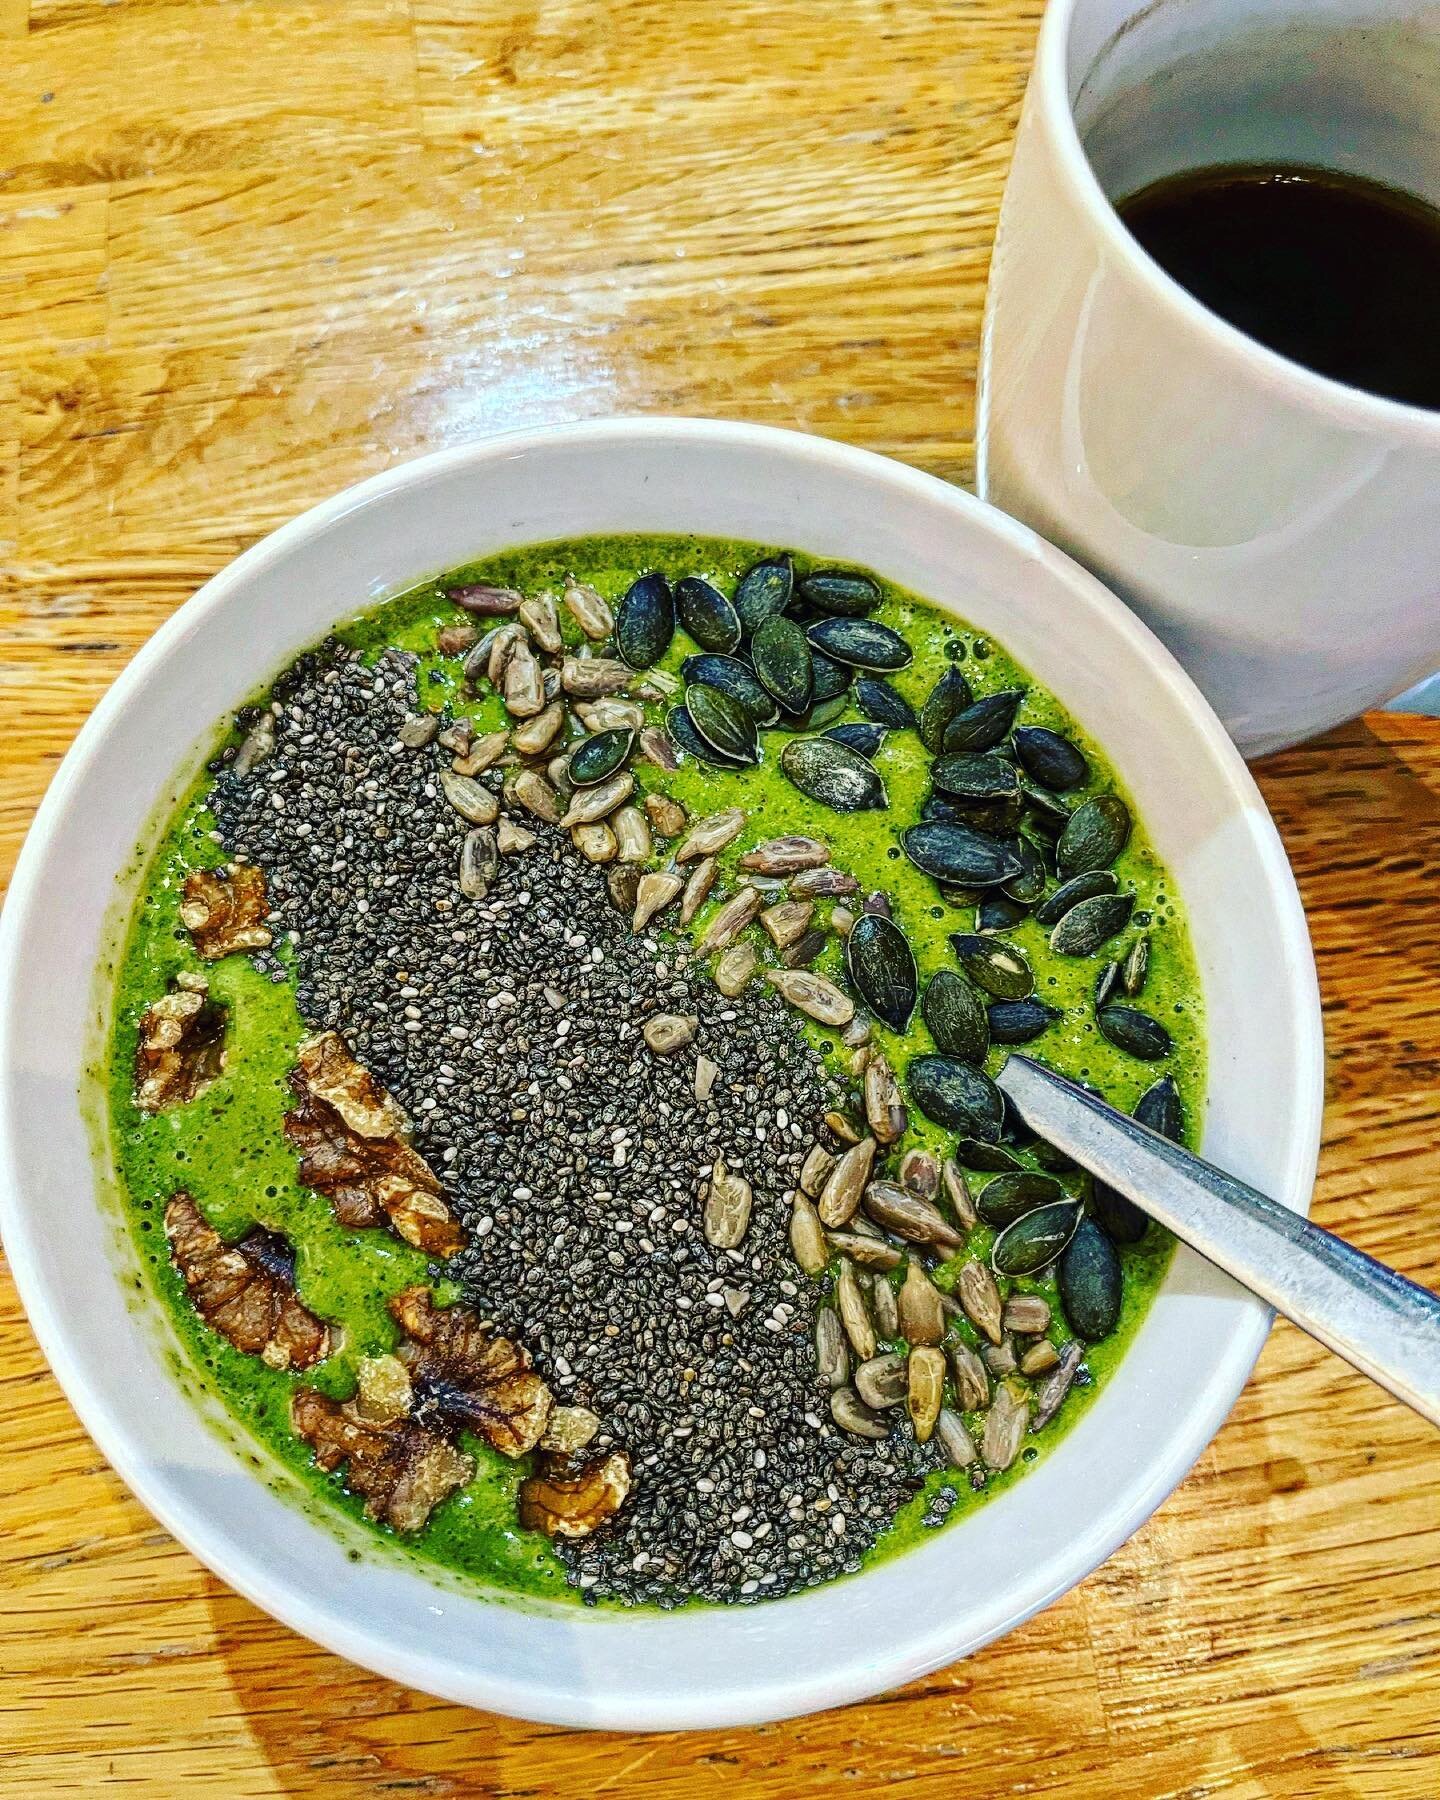 Morning smoothie bowl full of nutritious things 😍 this morning is kale, frozen banana, tumeric and oat milk all blended together. Then topped with chia seeds and walnuts for the omega 3. Also topped with sunflower and pumpkin seeds 🌱 Power breakfas